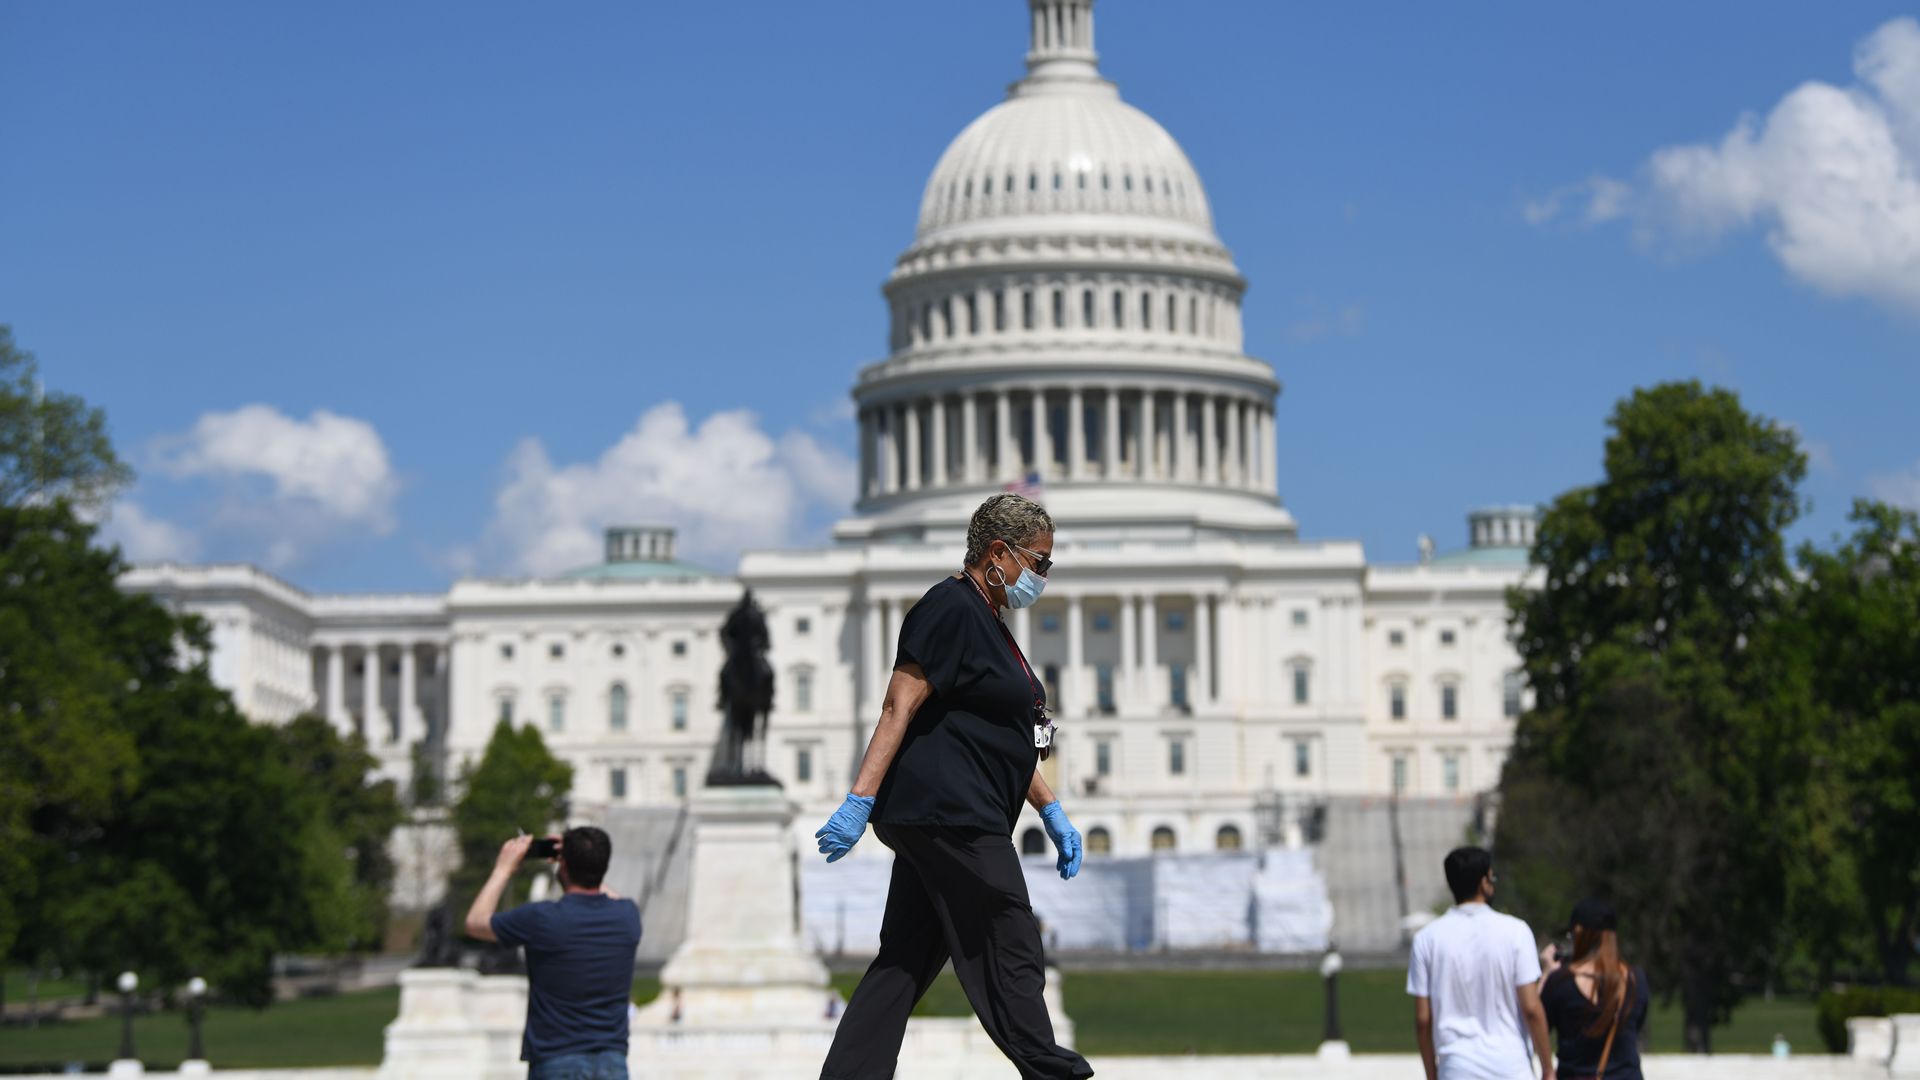 A woman wearing gloves and a face masks walking in front of the U.S. Capitol building